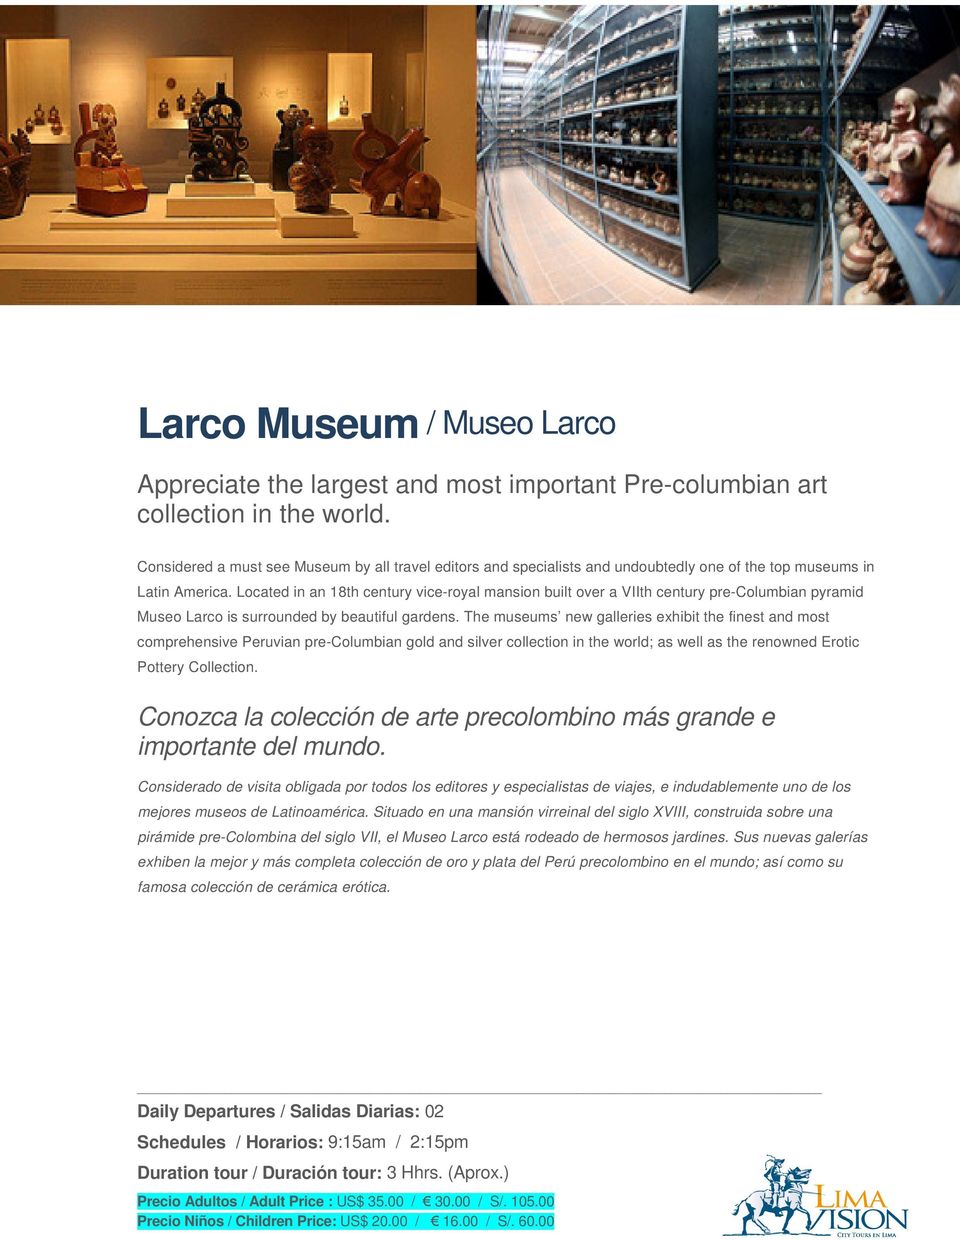 Located in an 18th century vice-royal mansion built over a VIIth century pre-columbian pyramid Museo Larco is surrounded by beautiful gardens.